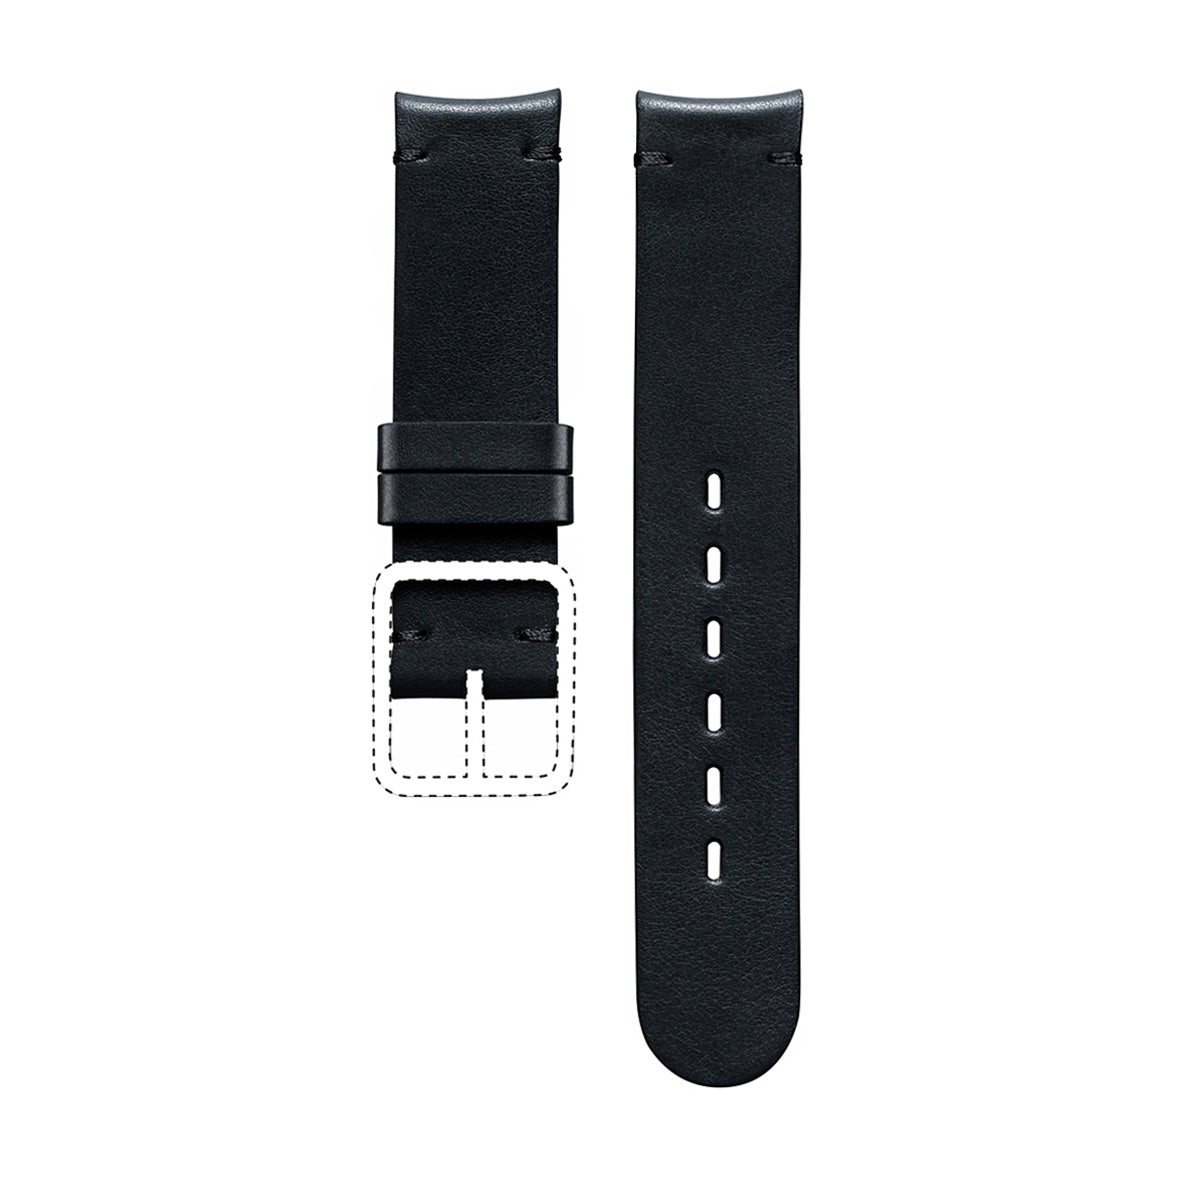 Smooth Leather Strap for TYPE 1 and TYPE 8